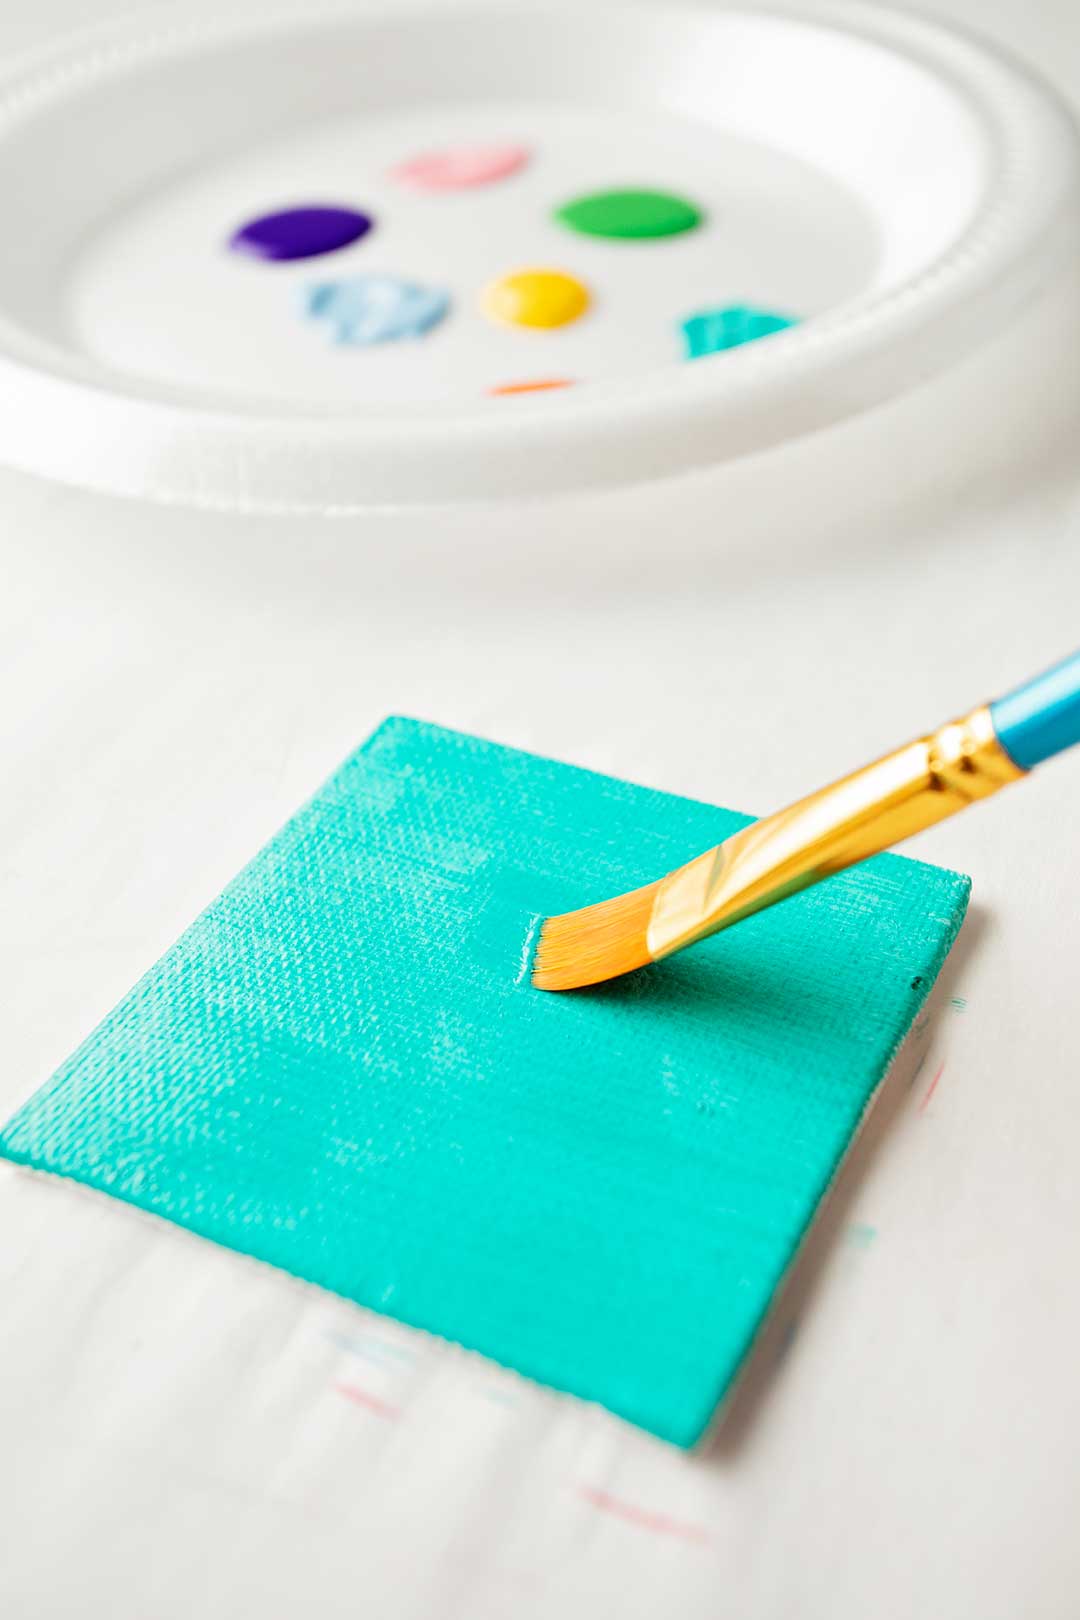 A paintbrush painting teal paint on to a mini canvas with a plate of paint colors close by.